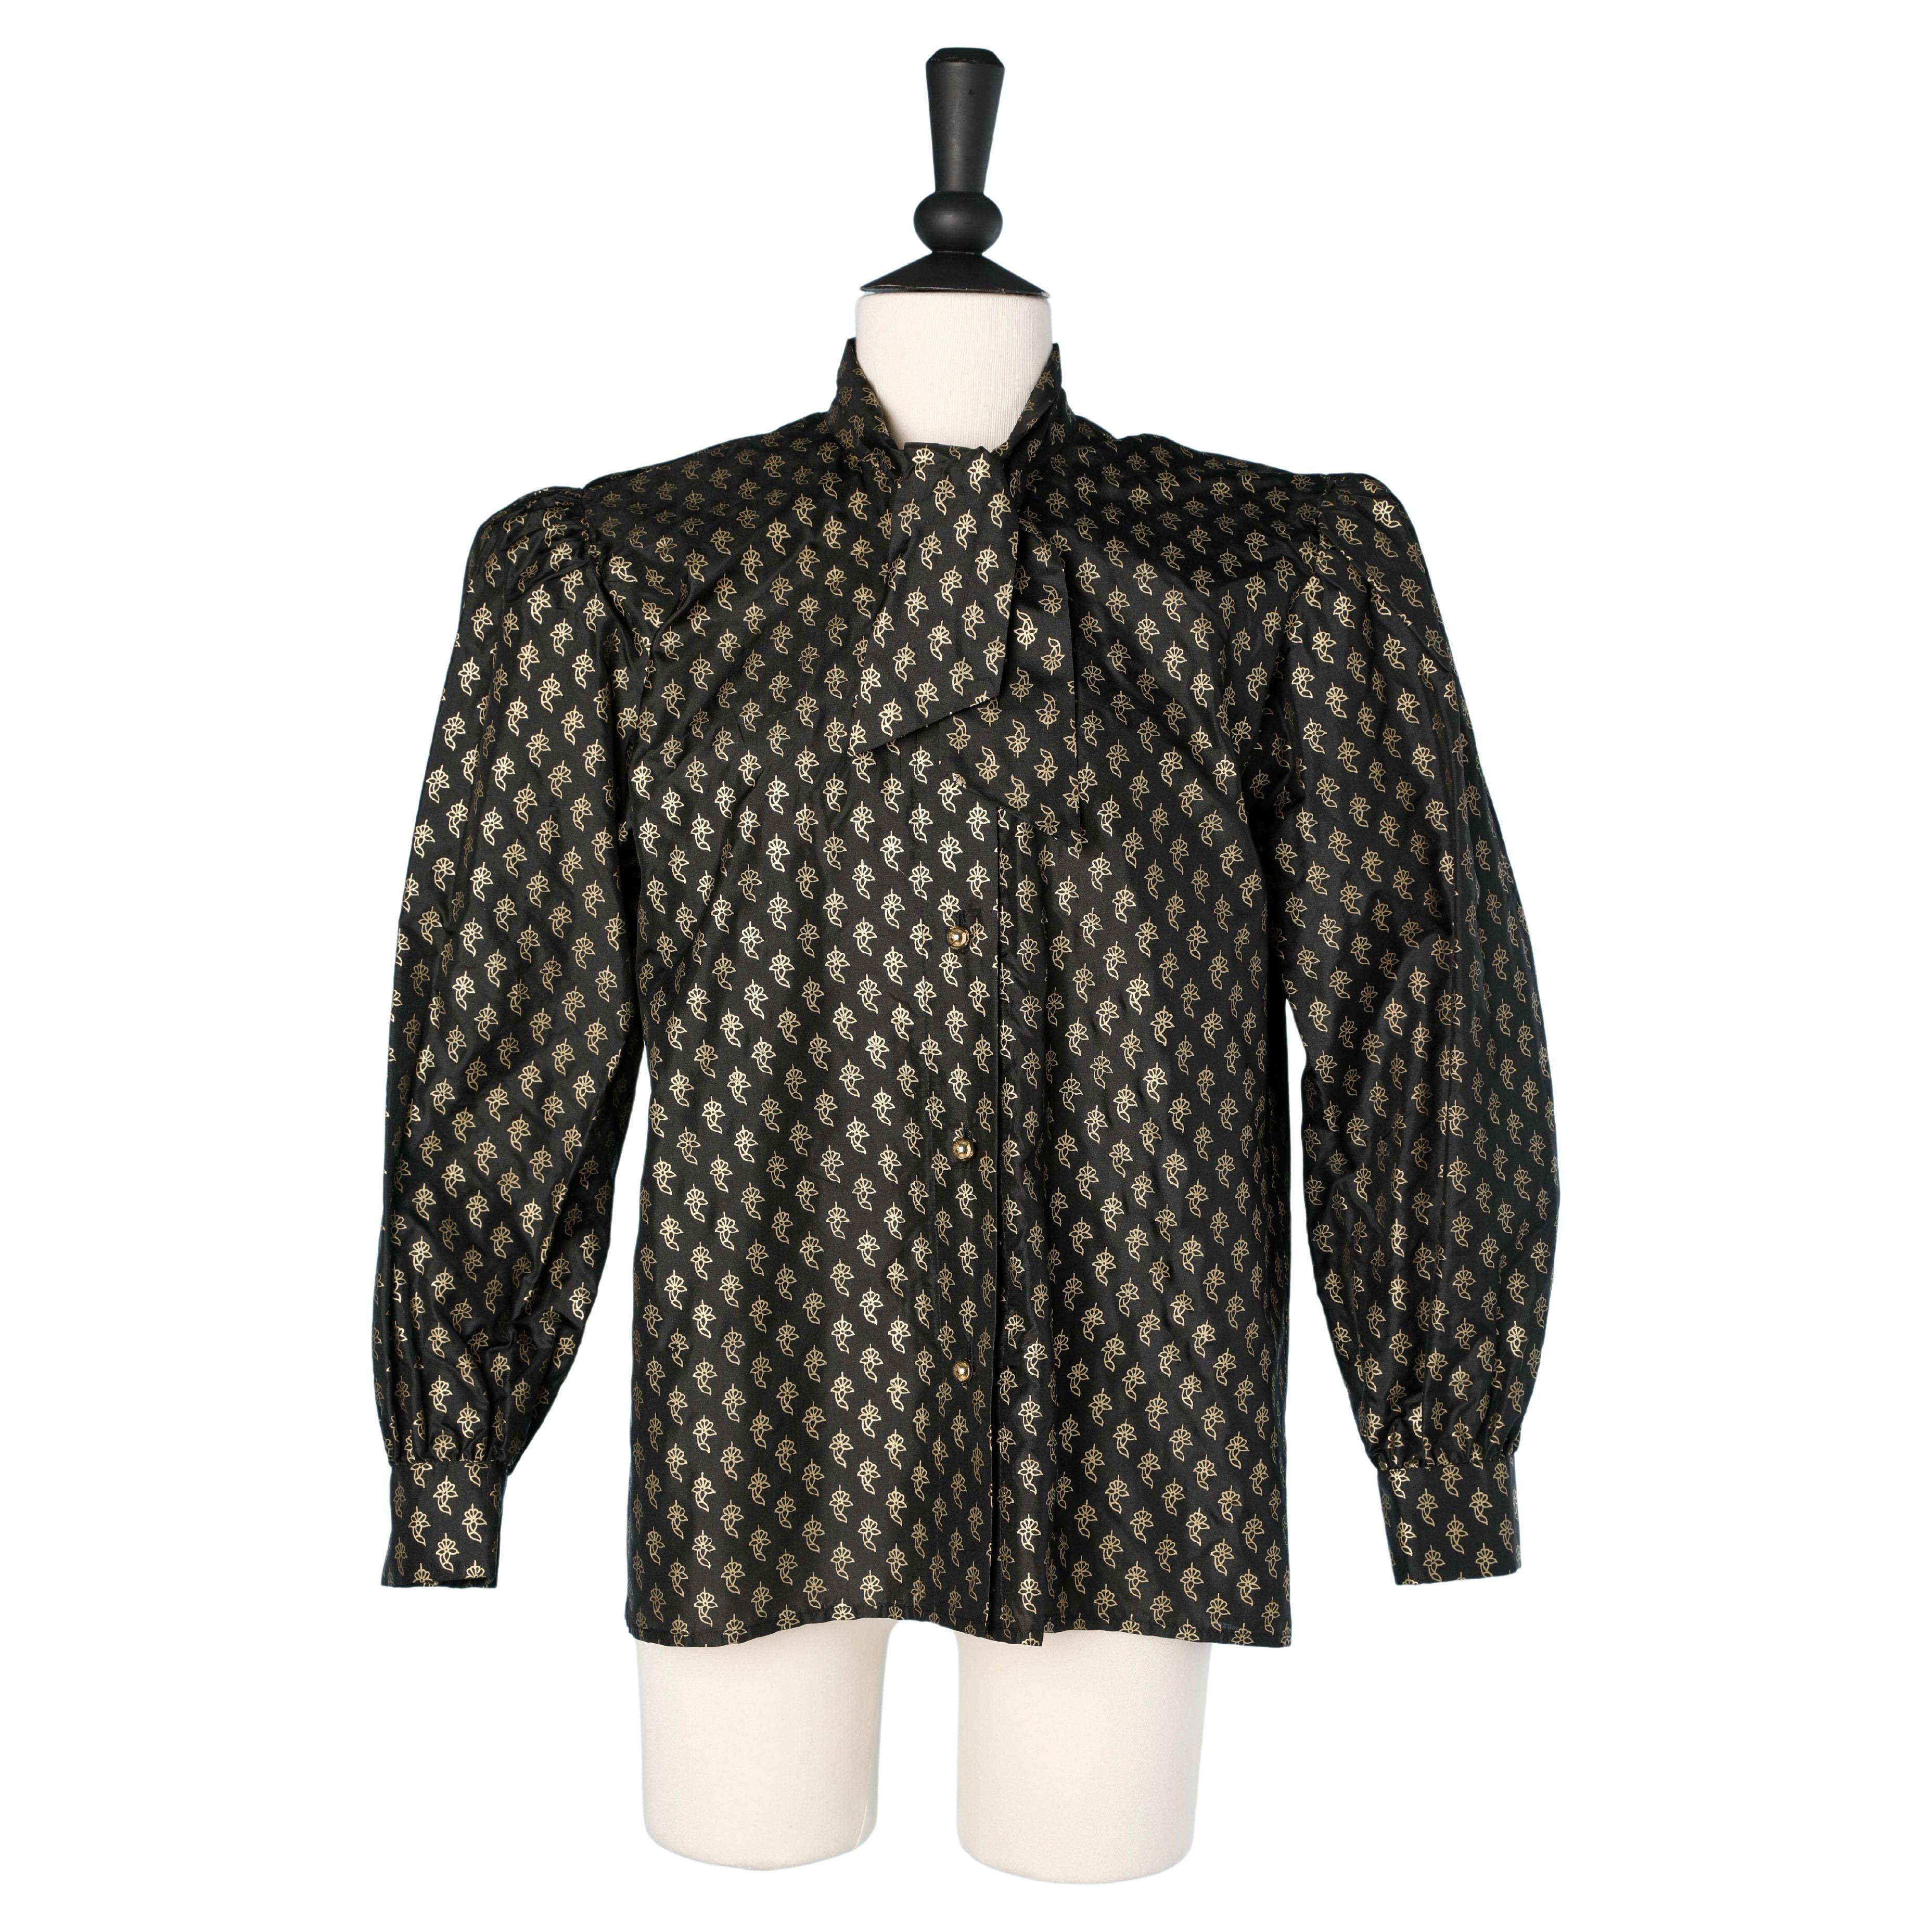 Black shirt with gold print pattern and bow tie Yves Saint Laurent Variation  For Sale